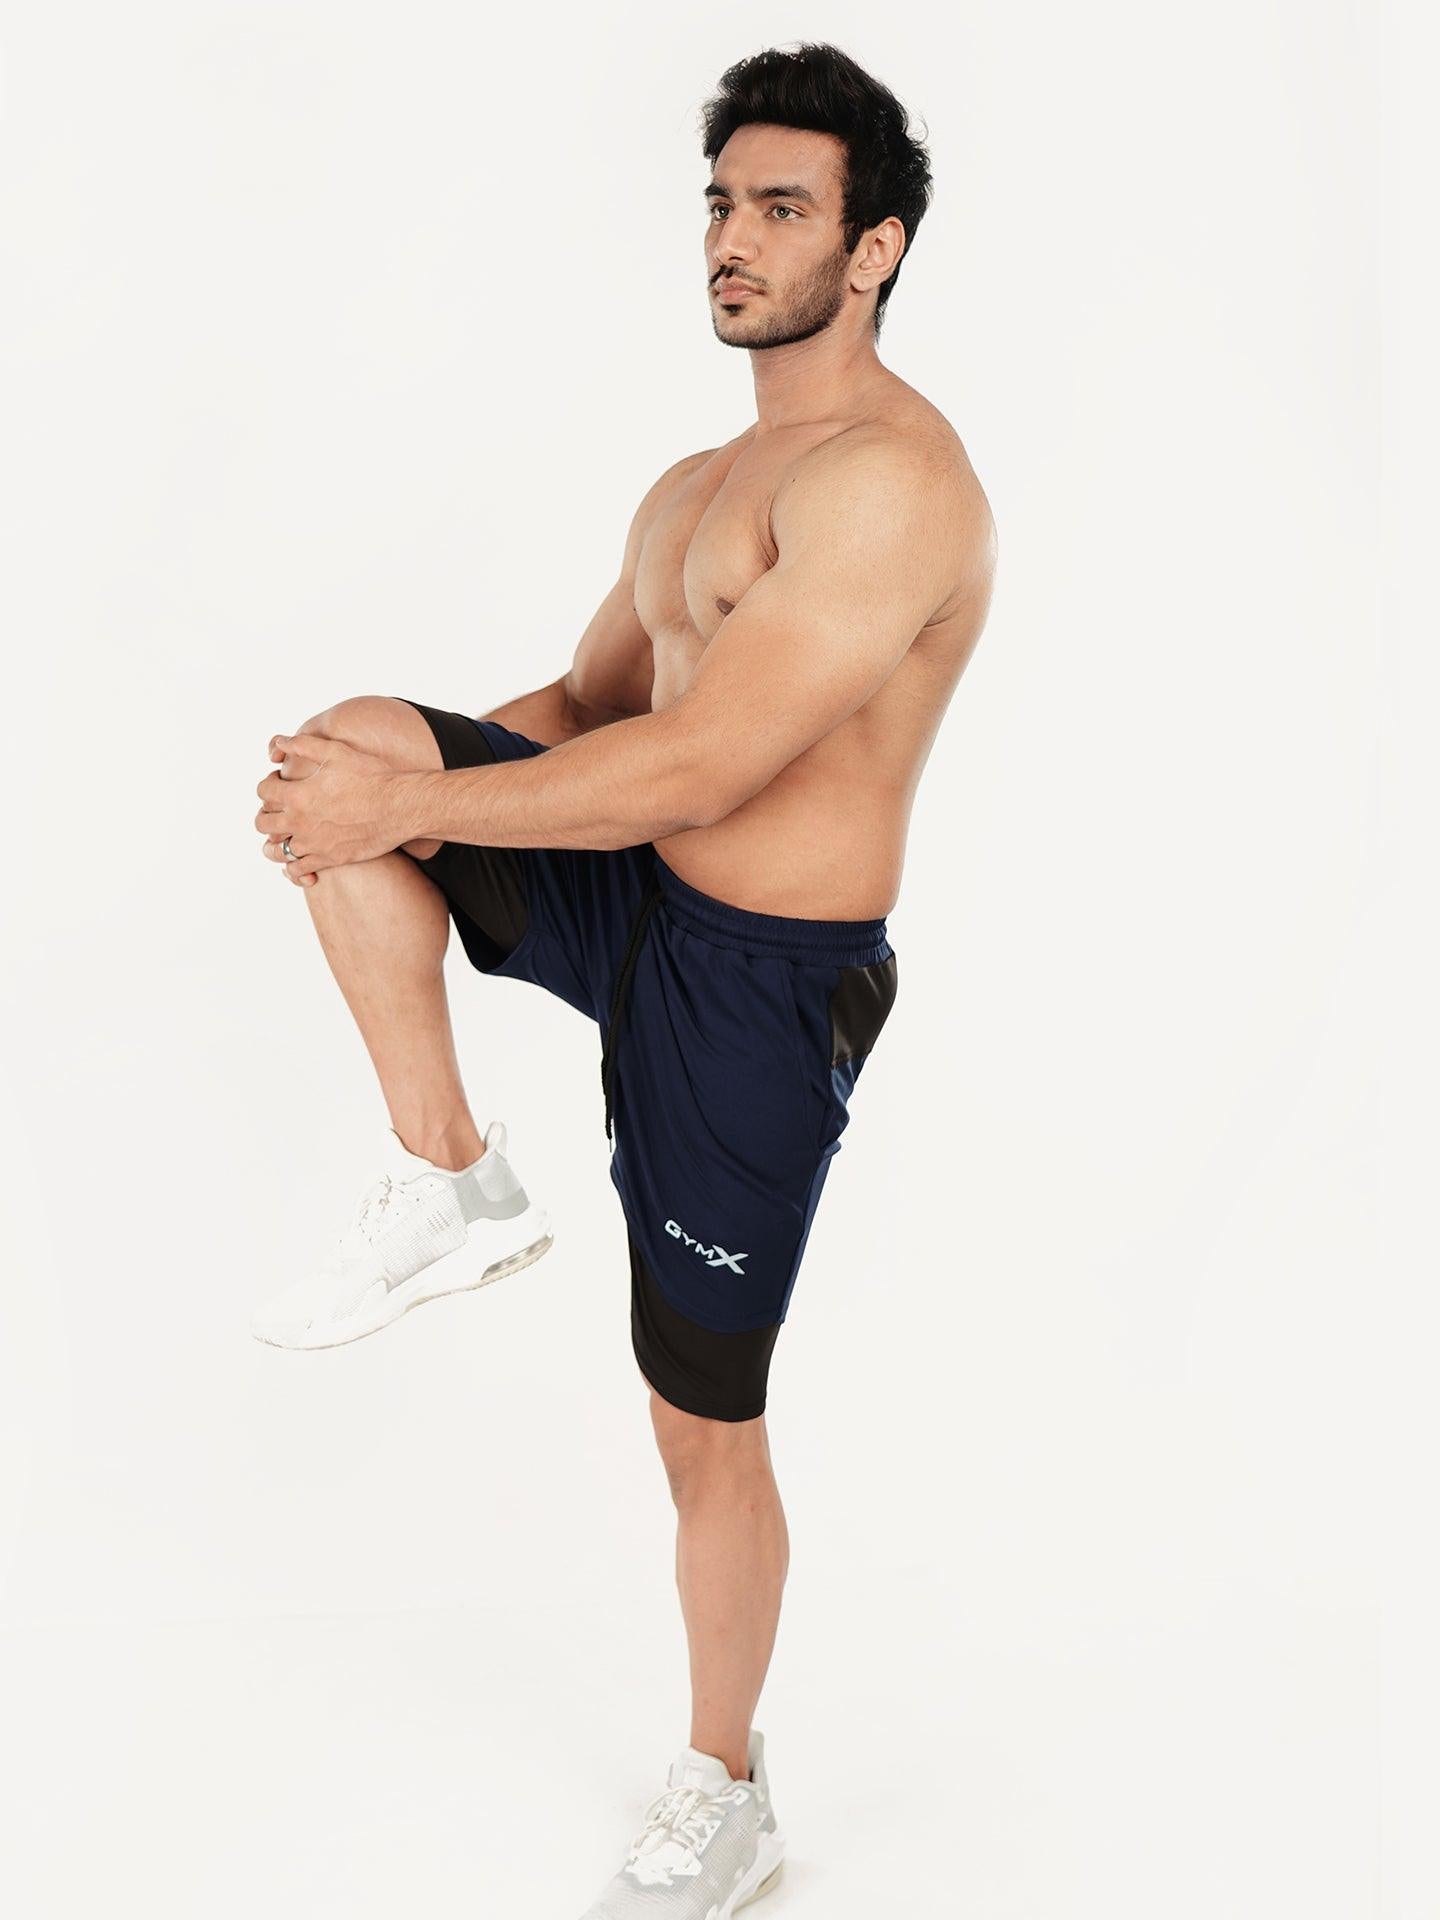 2-in-1 Shorts with phone pocket: Sublime Blue- Sale - GymX